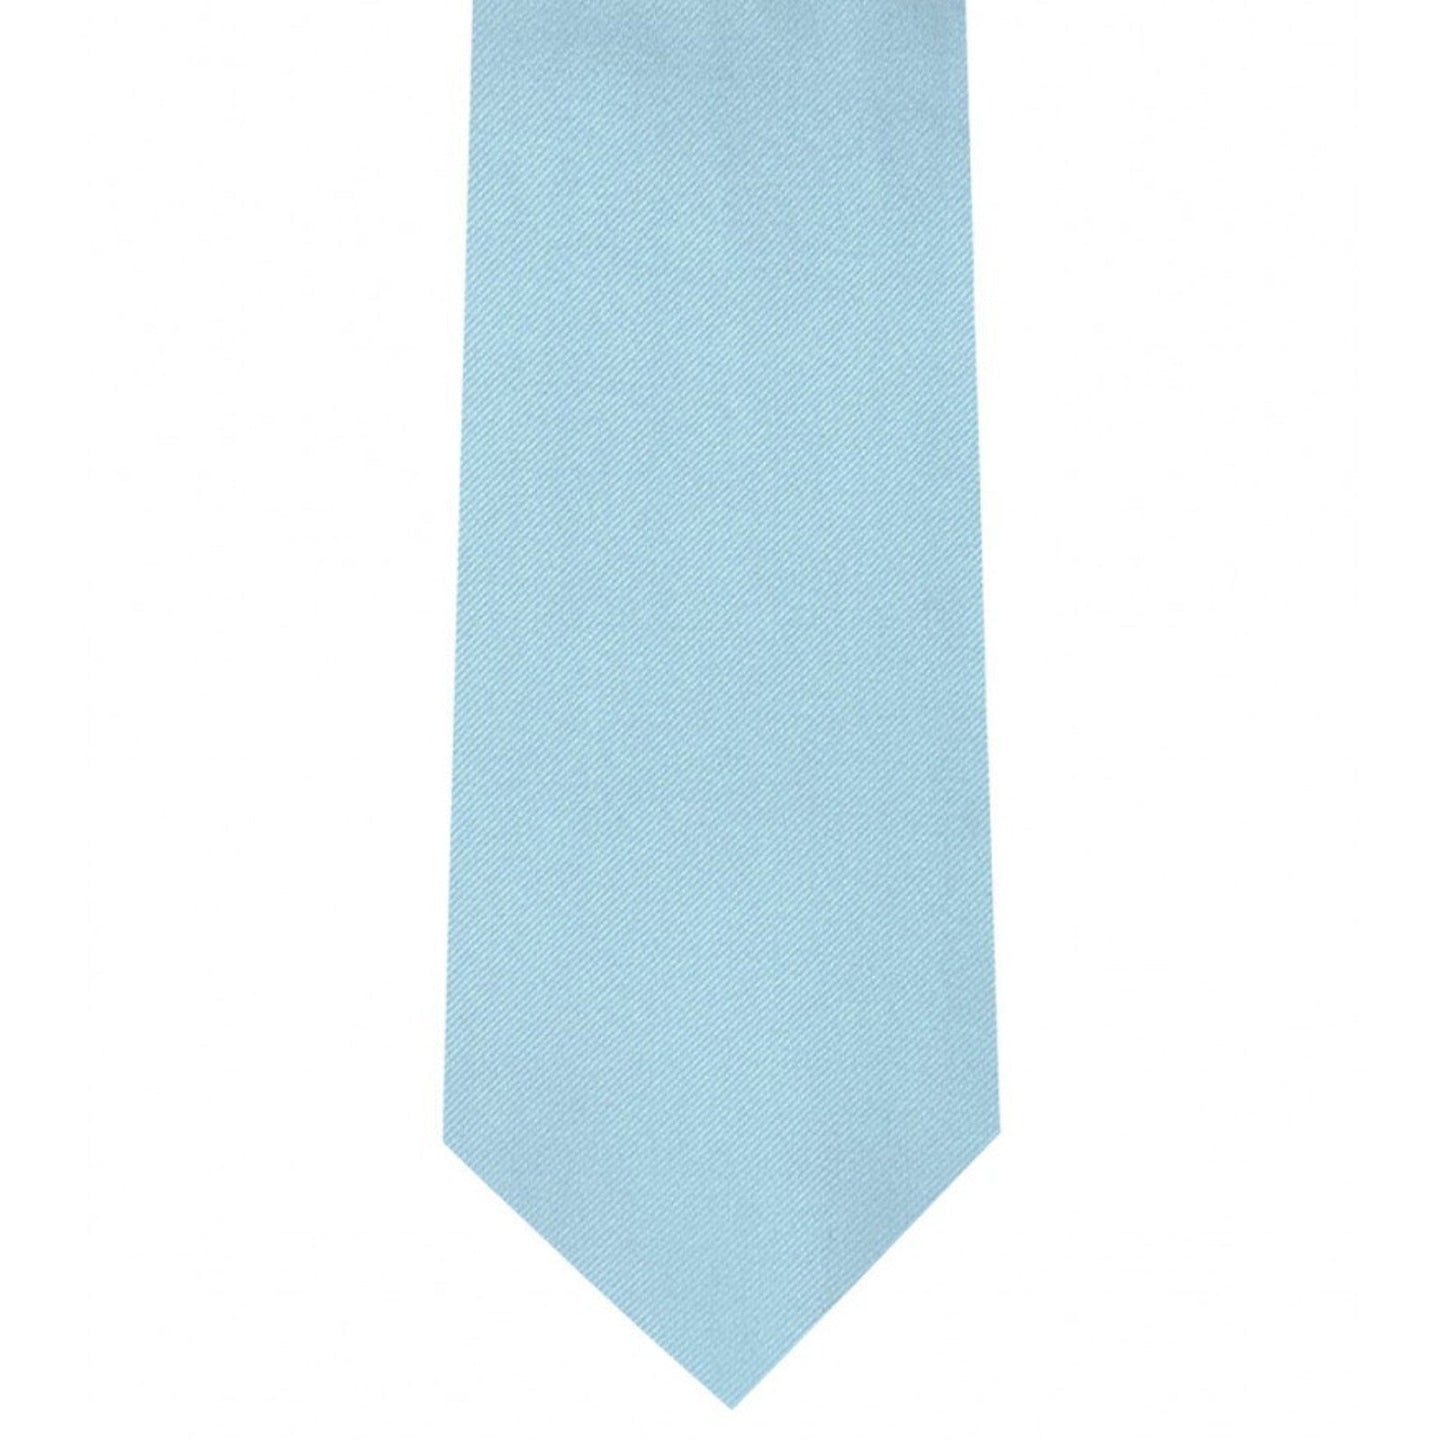 Classic Powder Blue Tie Ultra Skinny tie width 2.25 inches With Matching Pocket Square | KCT Menswear